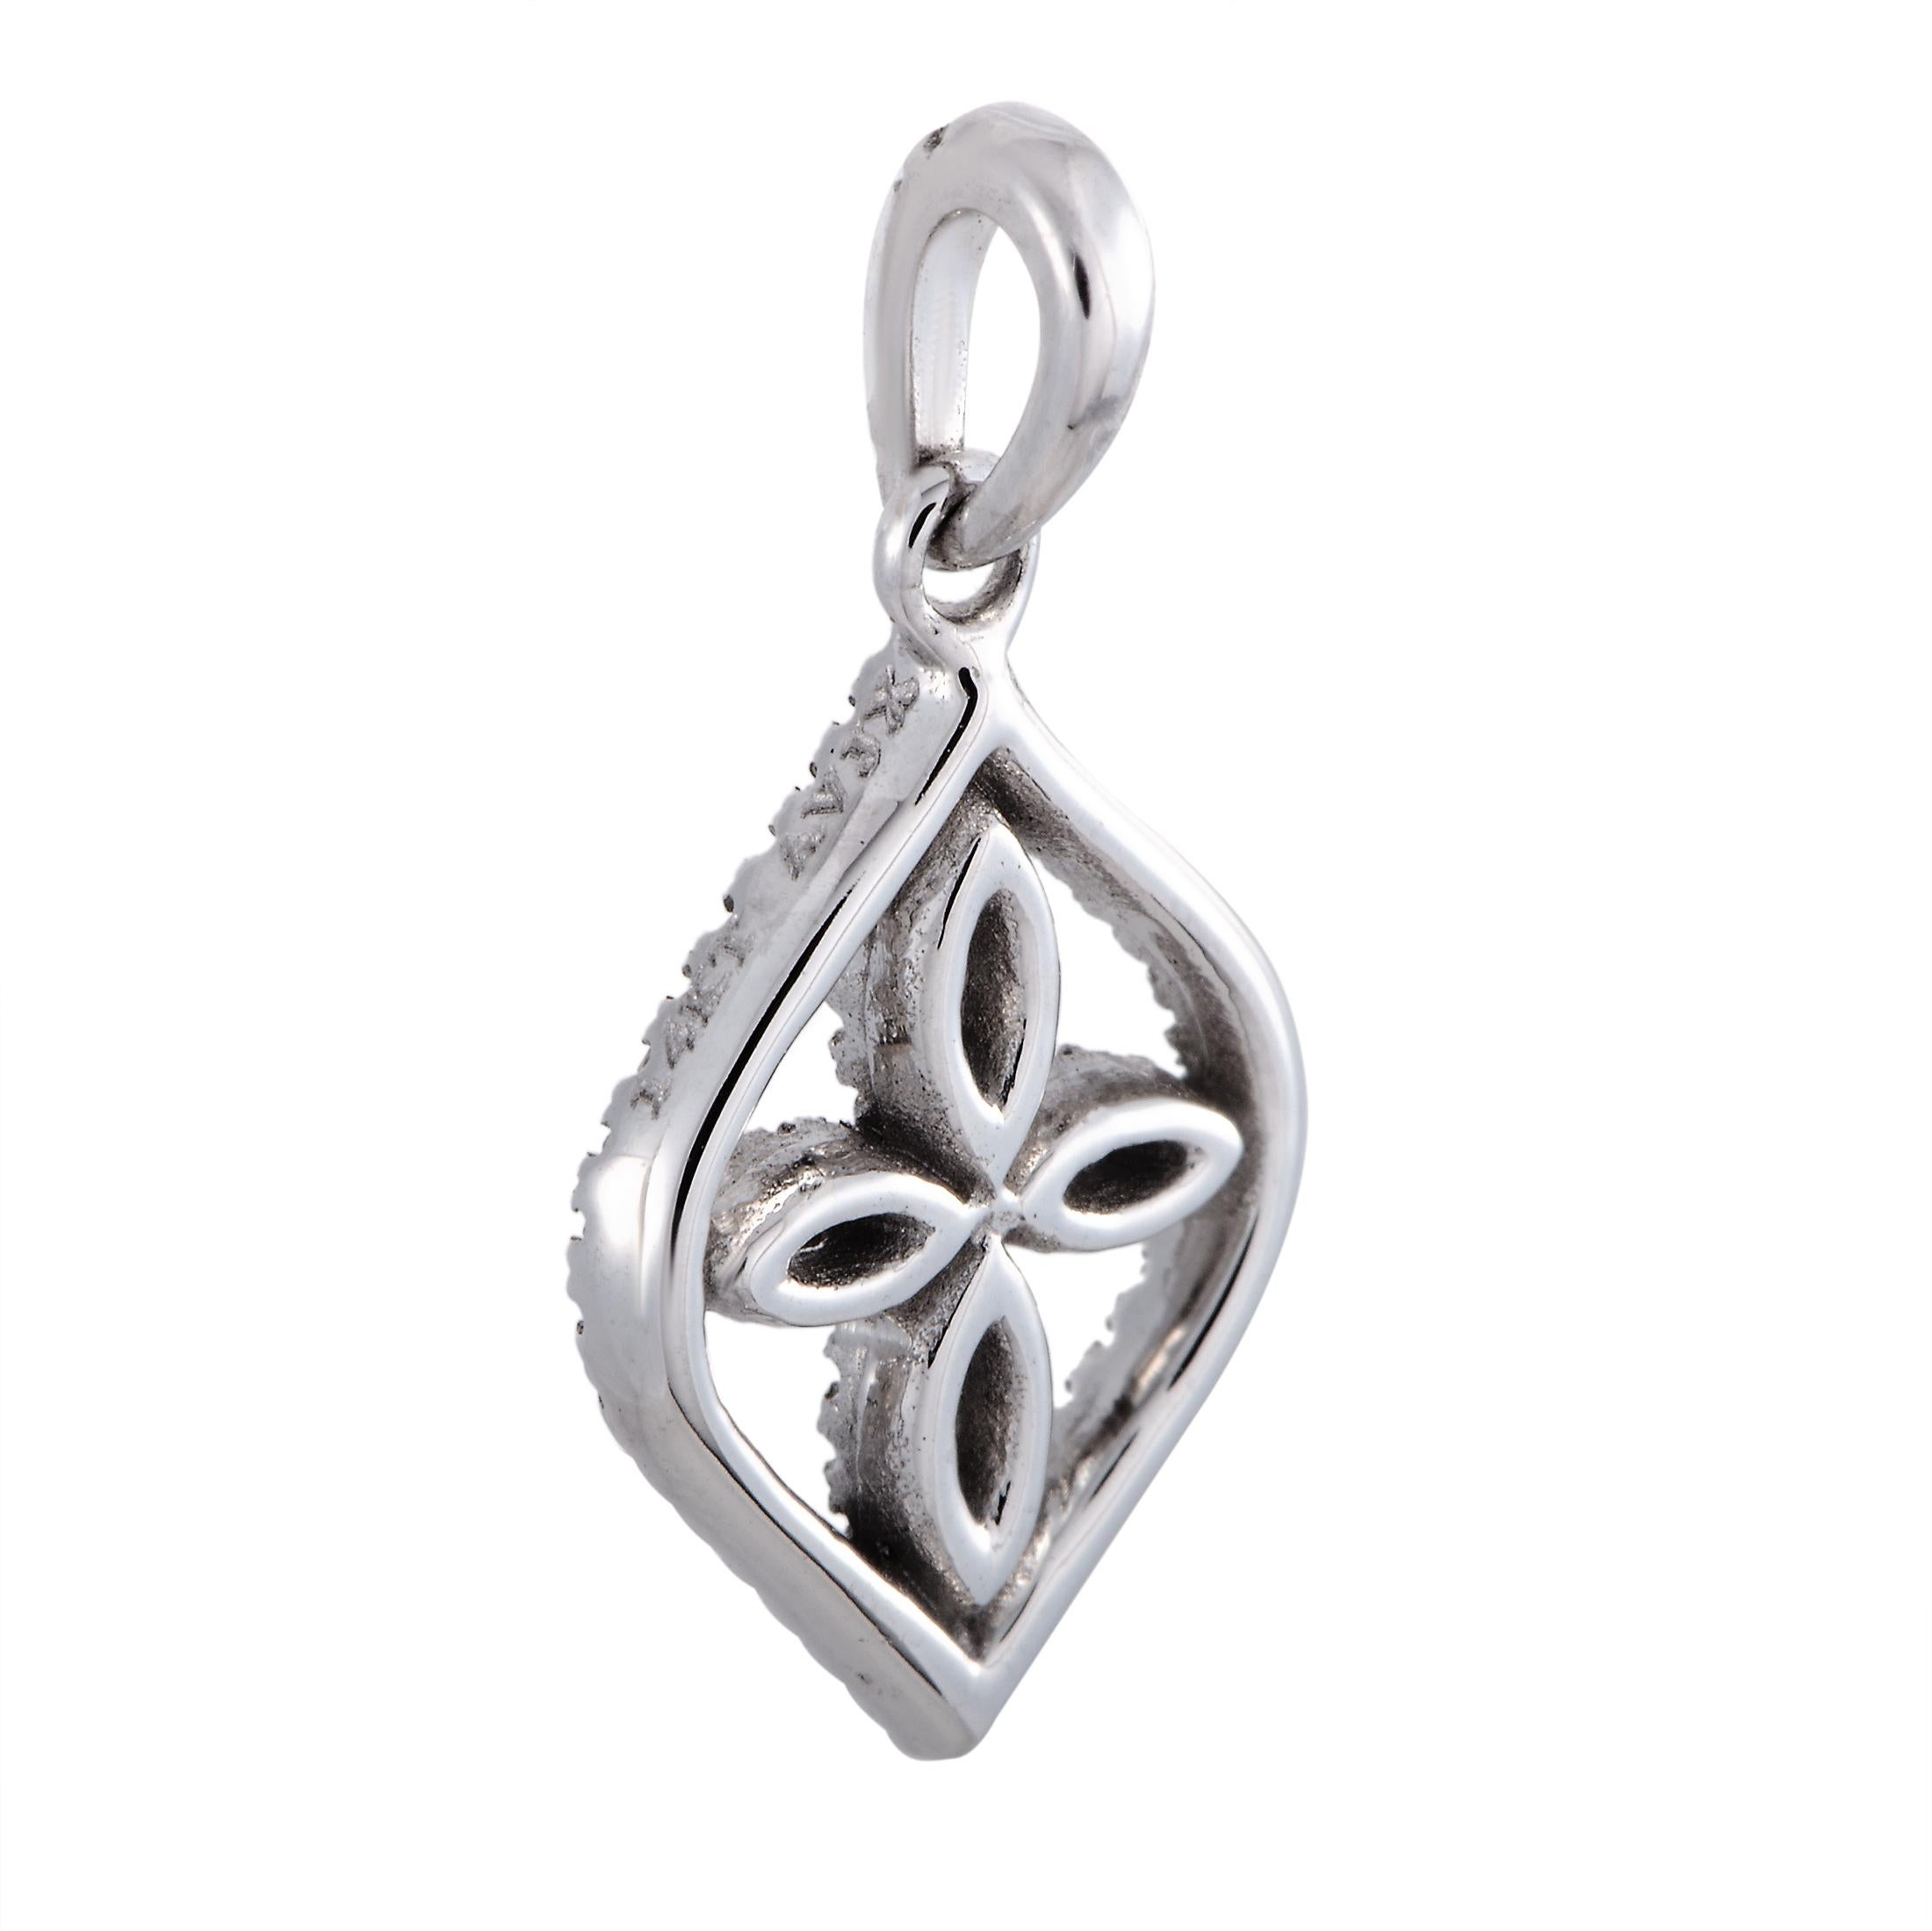 This LB Exclusive pendant is made out of 14K white gold and diamonds that weigh 0.13 carats in total. The pendant measures 0.55” in length and 0.37” in width and weighs 1.1 grams.

Offered in brand new condition, this item includes a gift box.